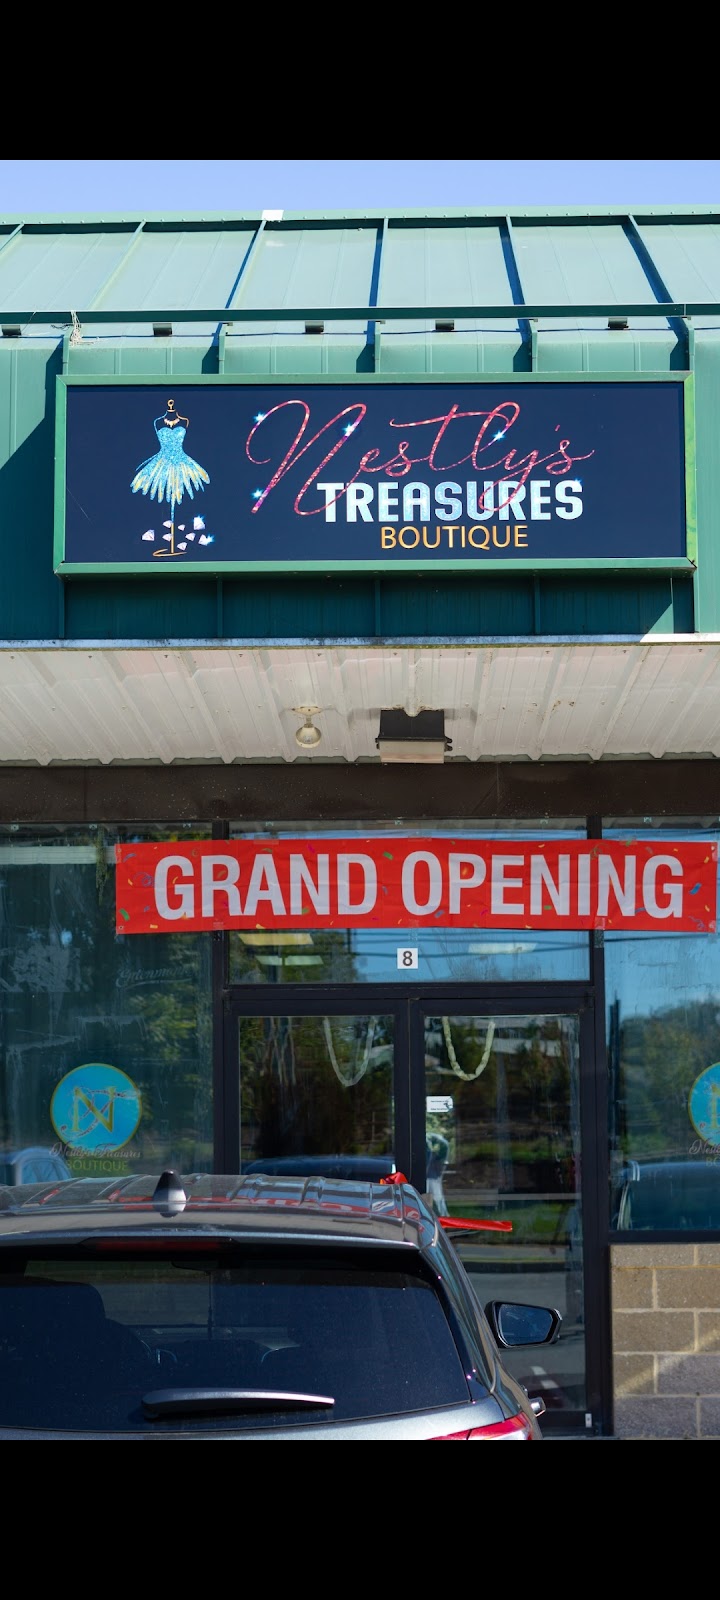 Nestlys Treasures Boutique | 1315 Tatamy Rd Suite# 8, Easton, PA 18045 | Phone: (484) 627-2952